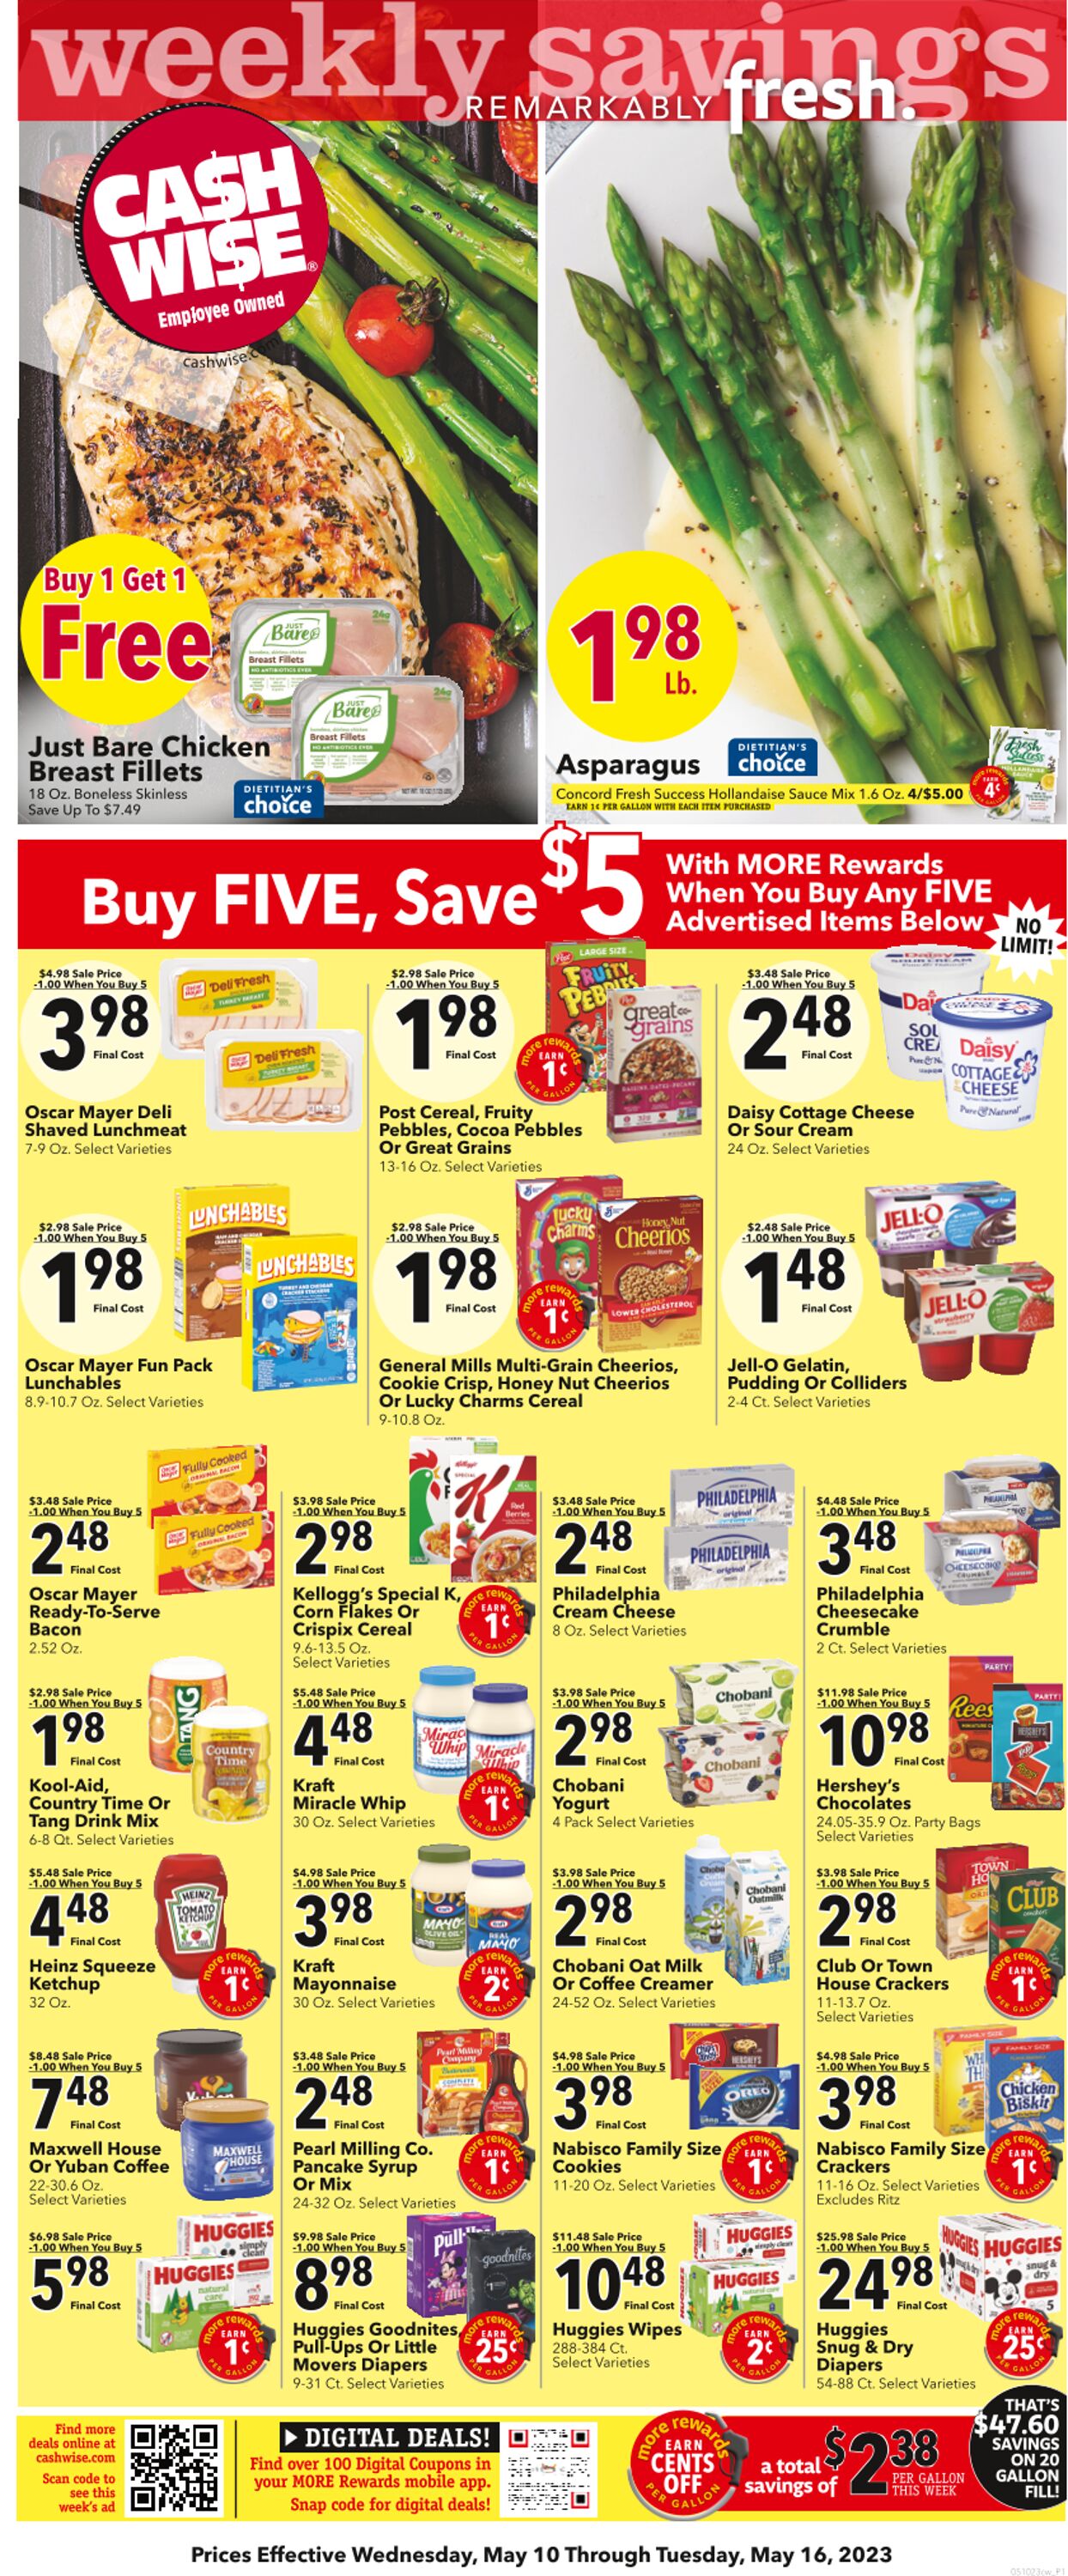 Cash Wise Weekly Ad Circular - valid 05/11-05/17/2023 (Page 3)